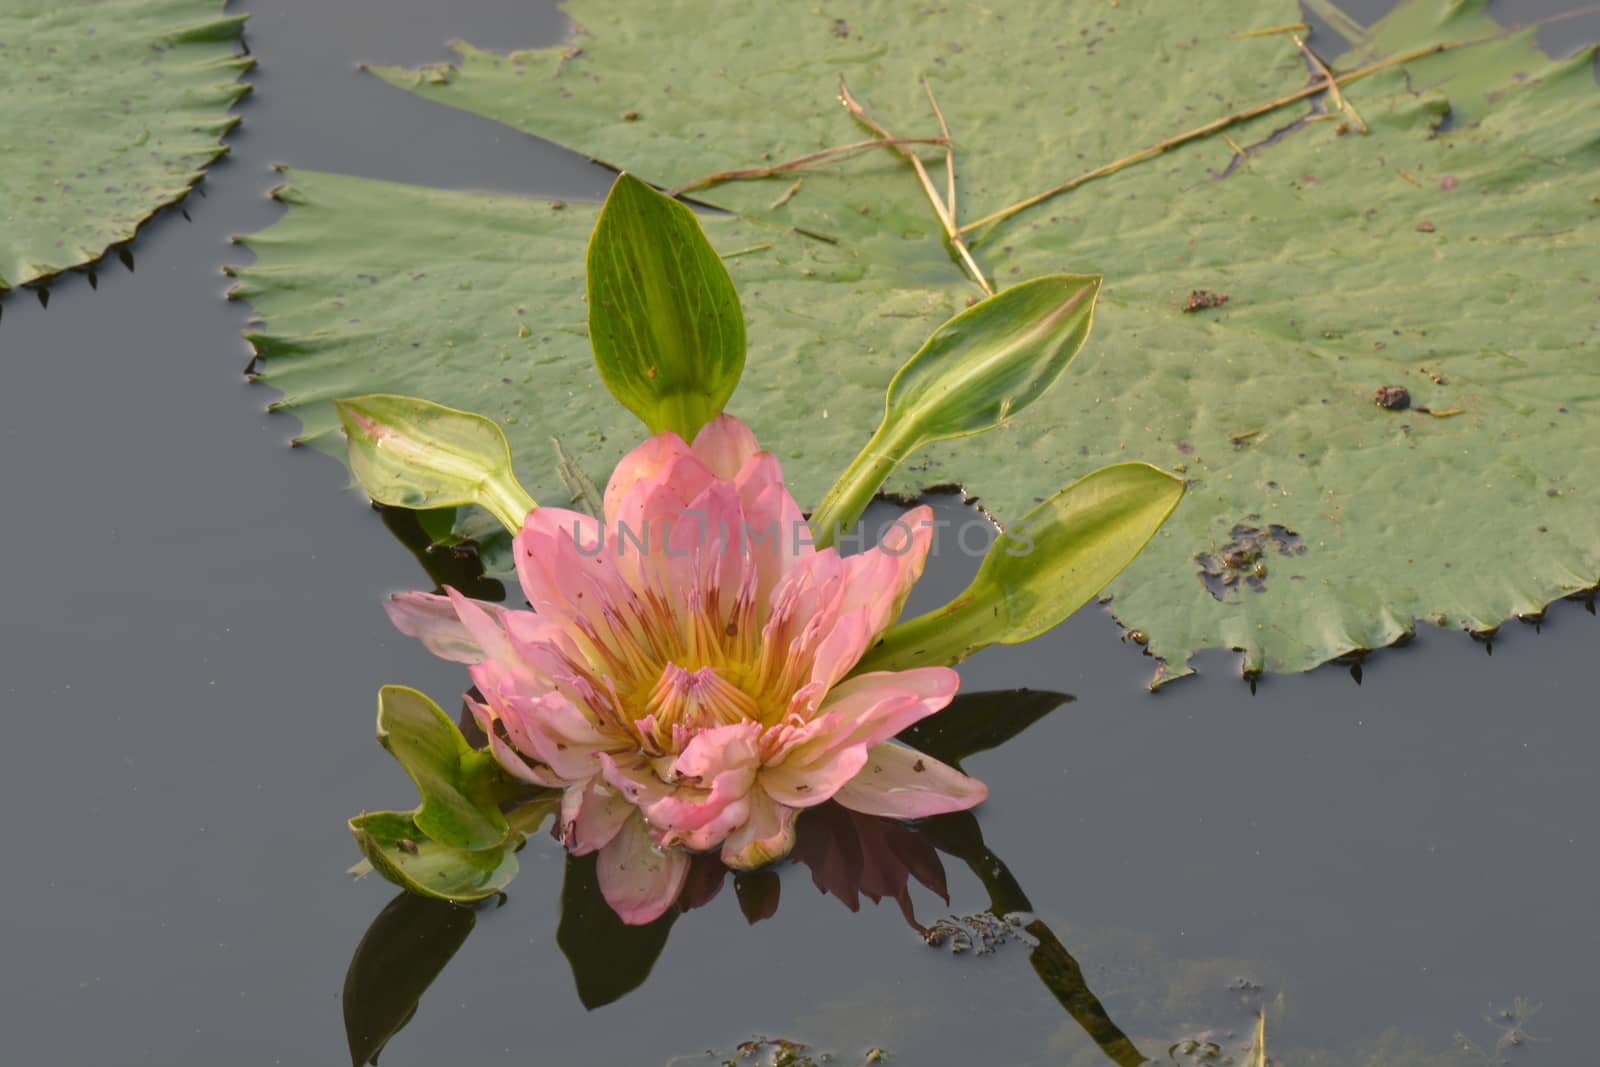 A beautiful old rose water lily  or lotus flower in pond